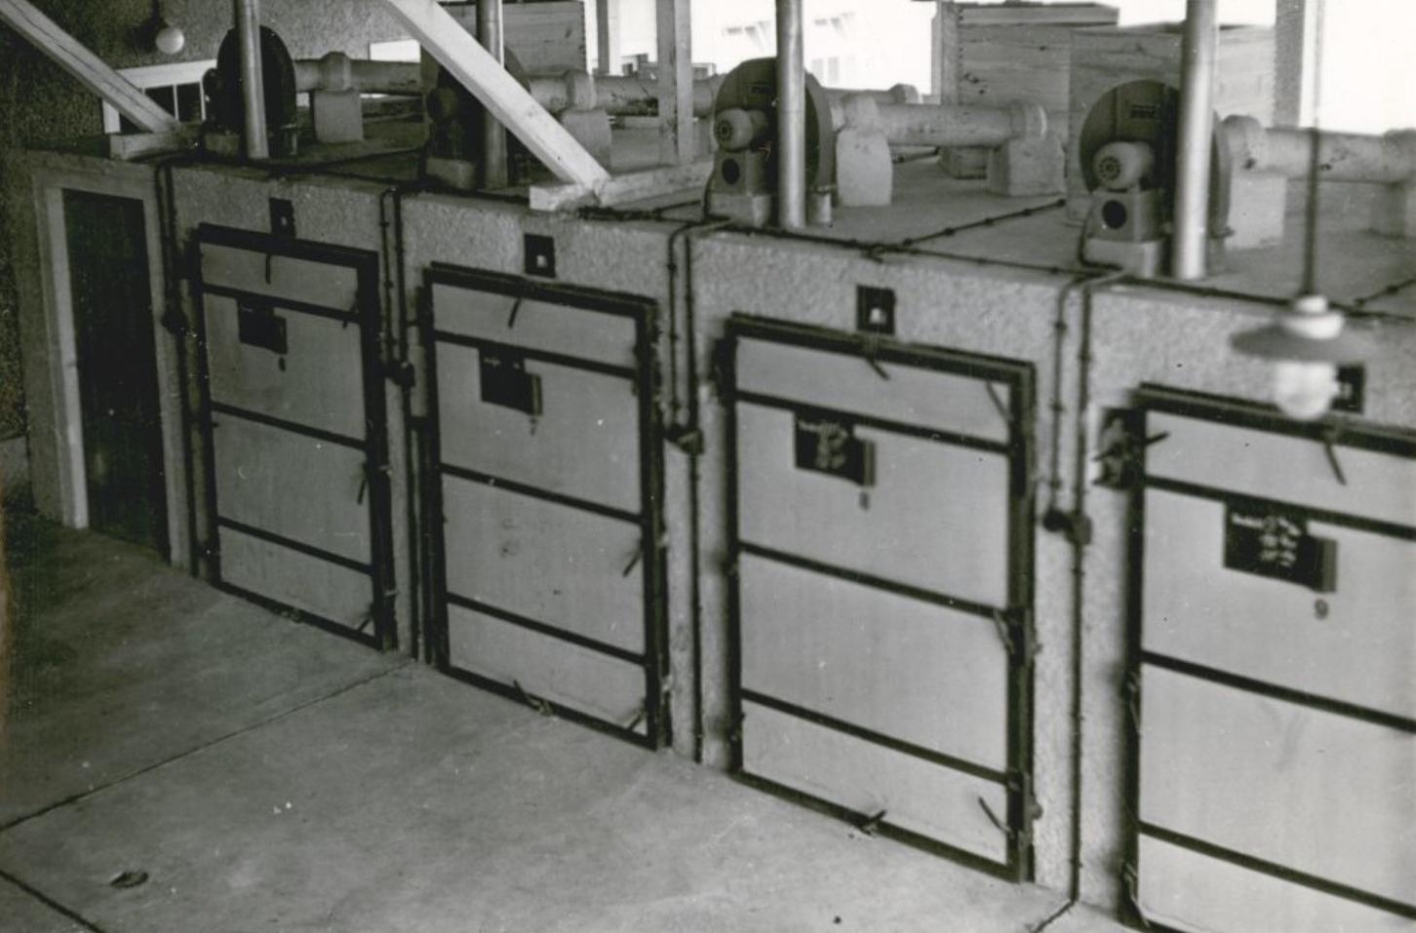 Four boxes with lockable doors can be seen next to each other. Pipes are fed to the boxes.